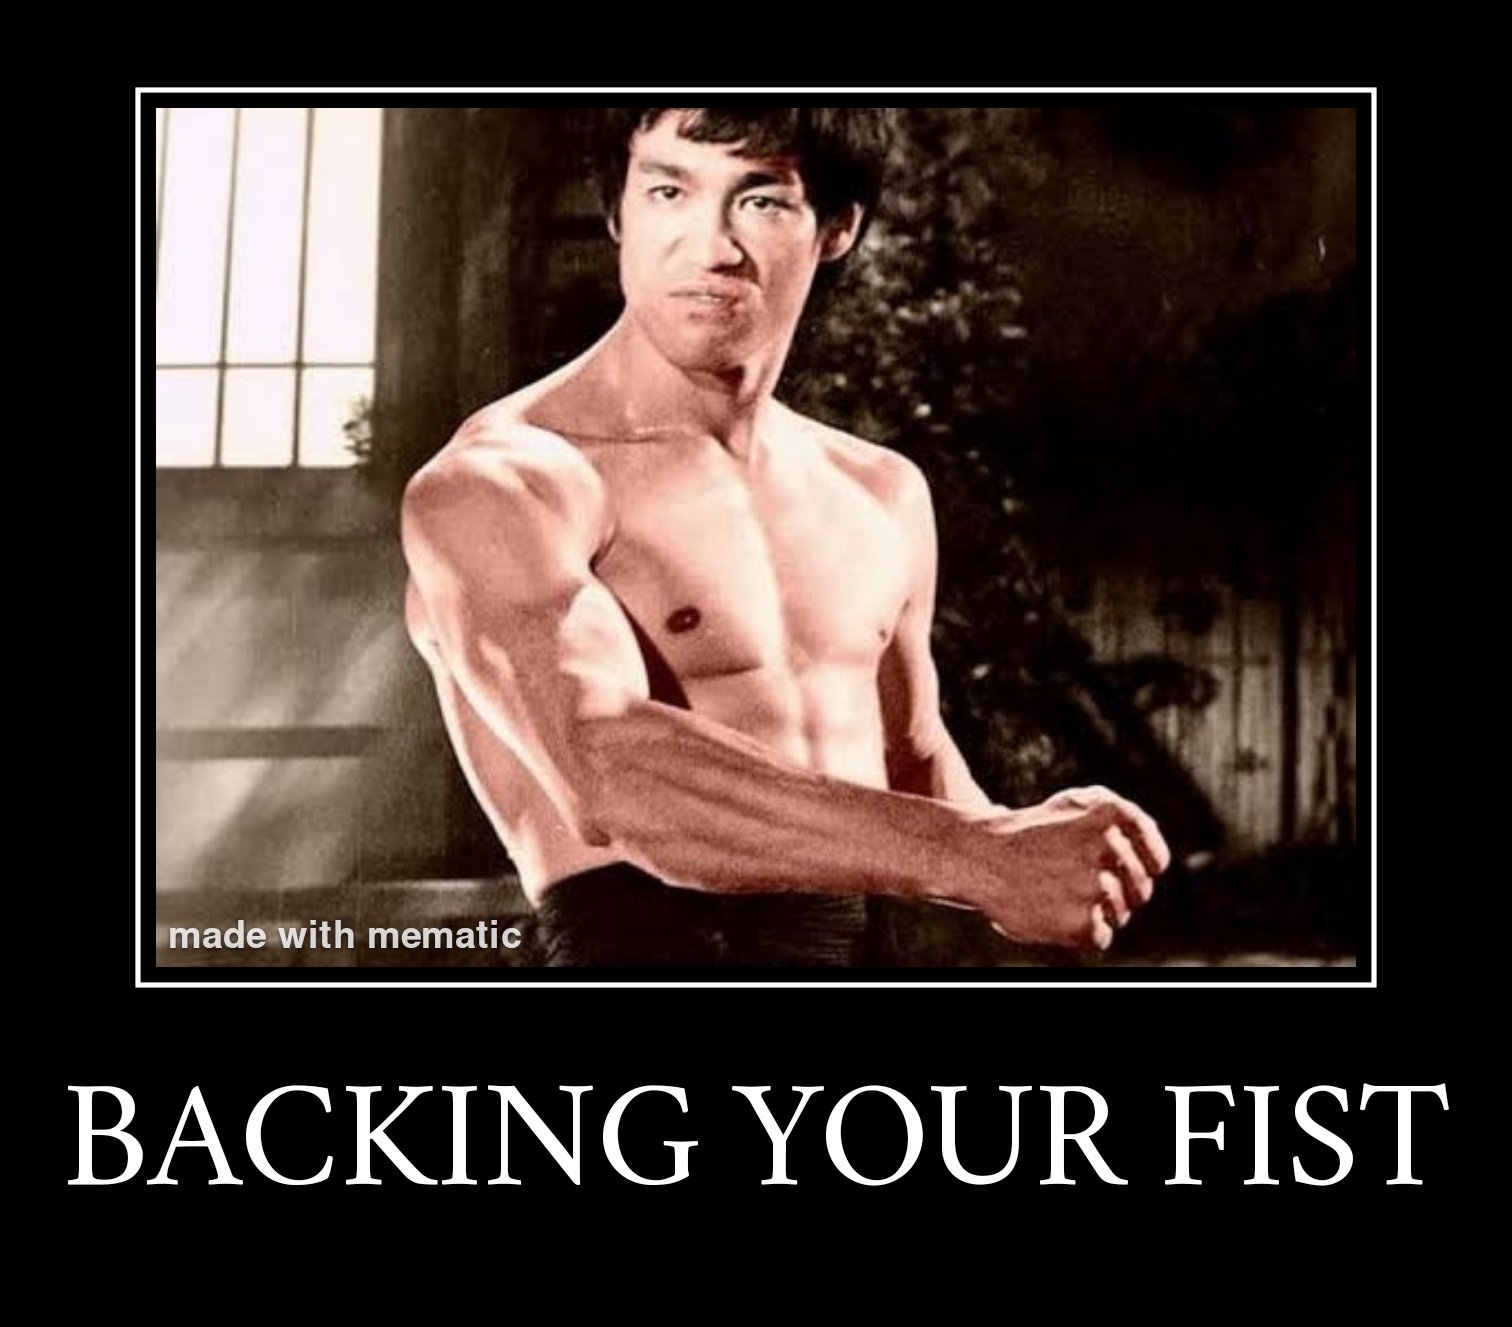 Backing your fist